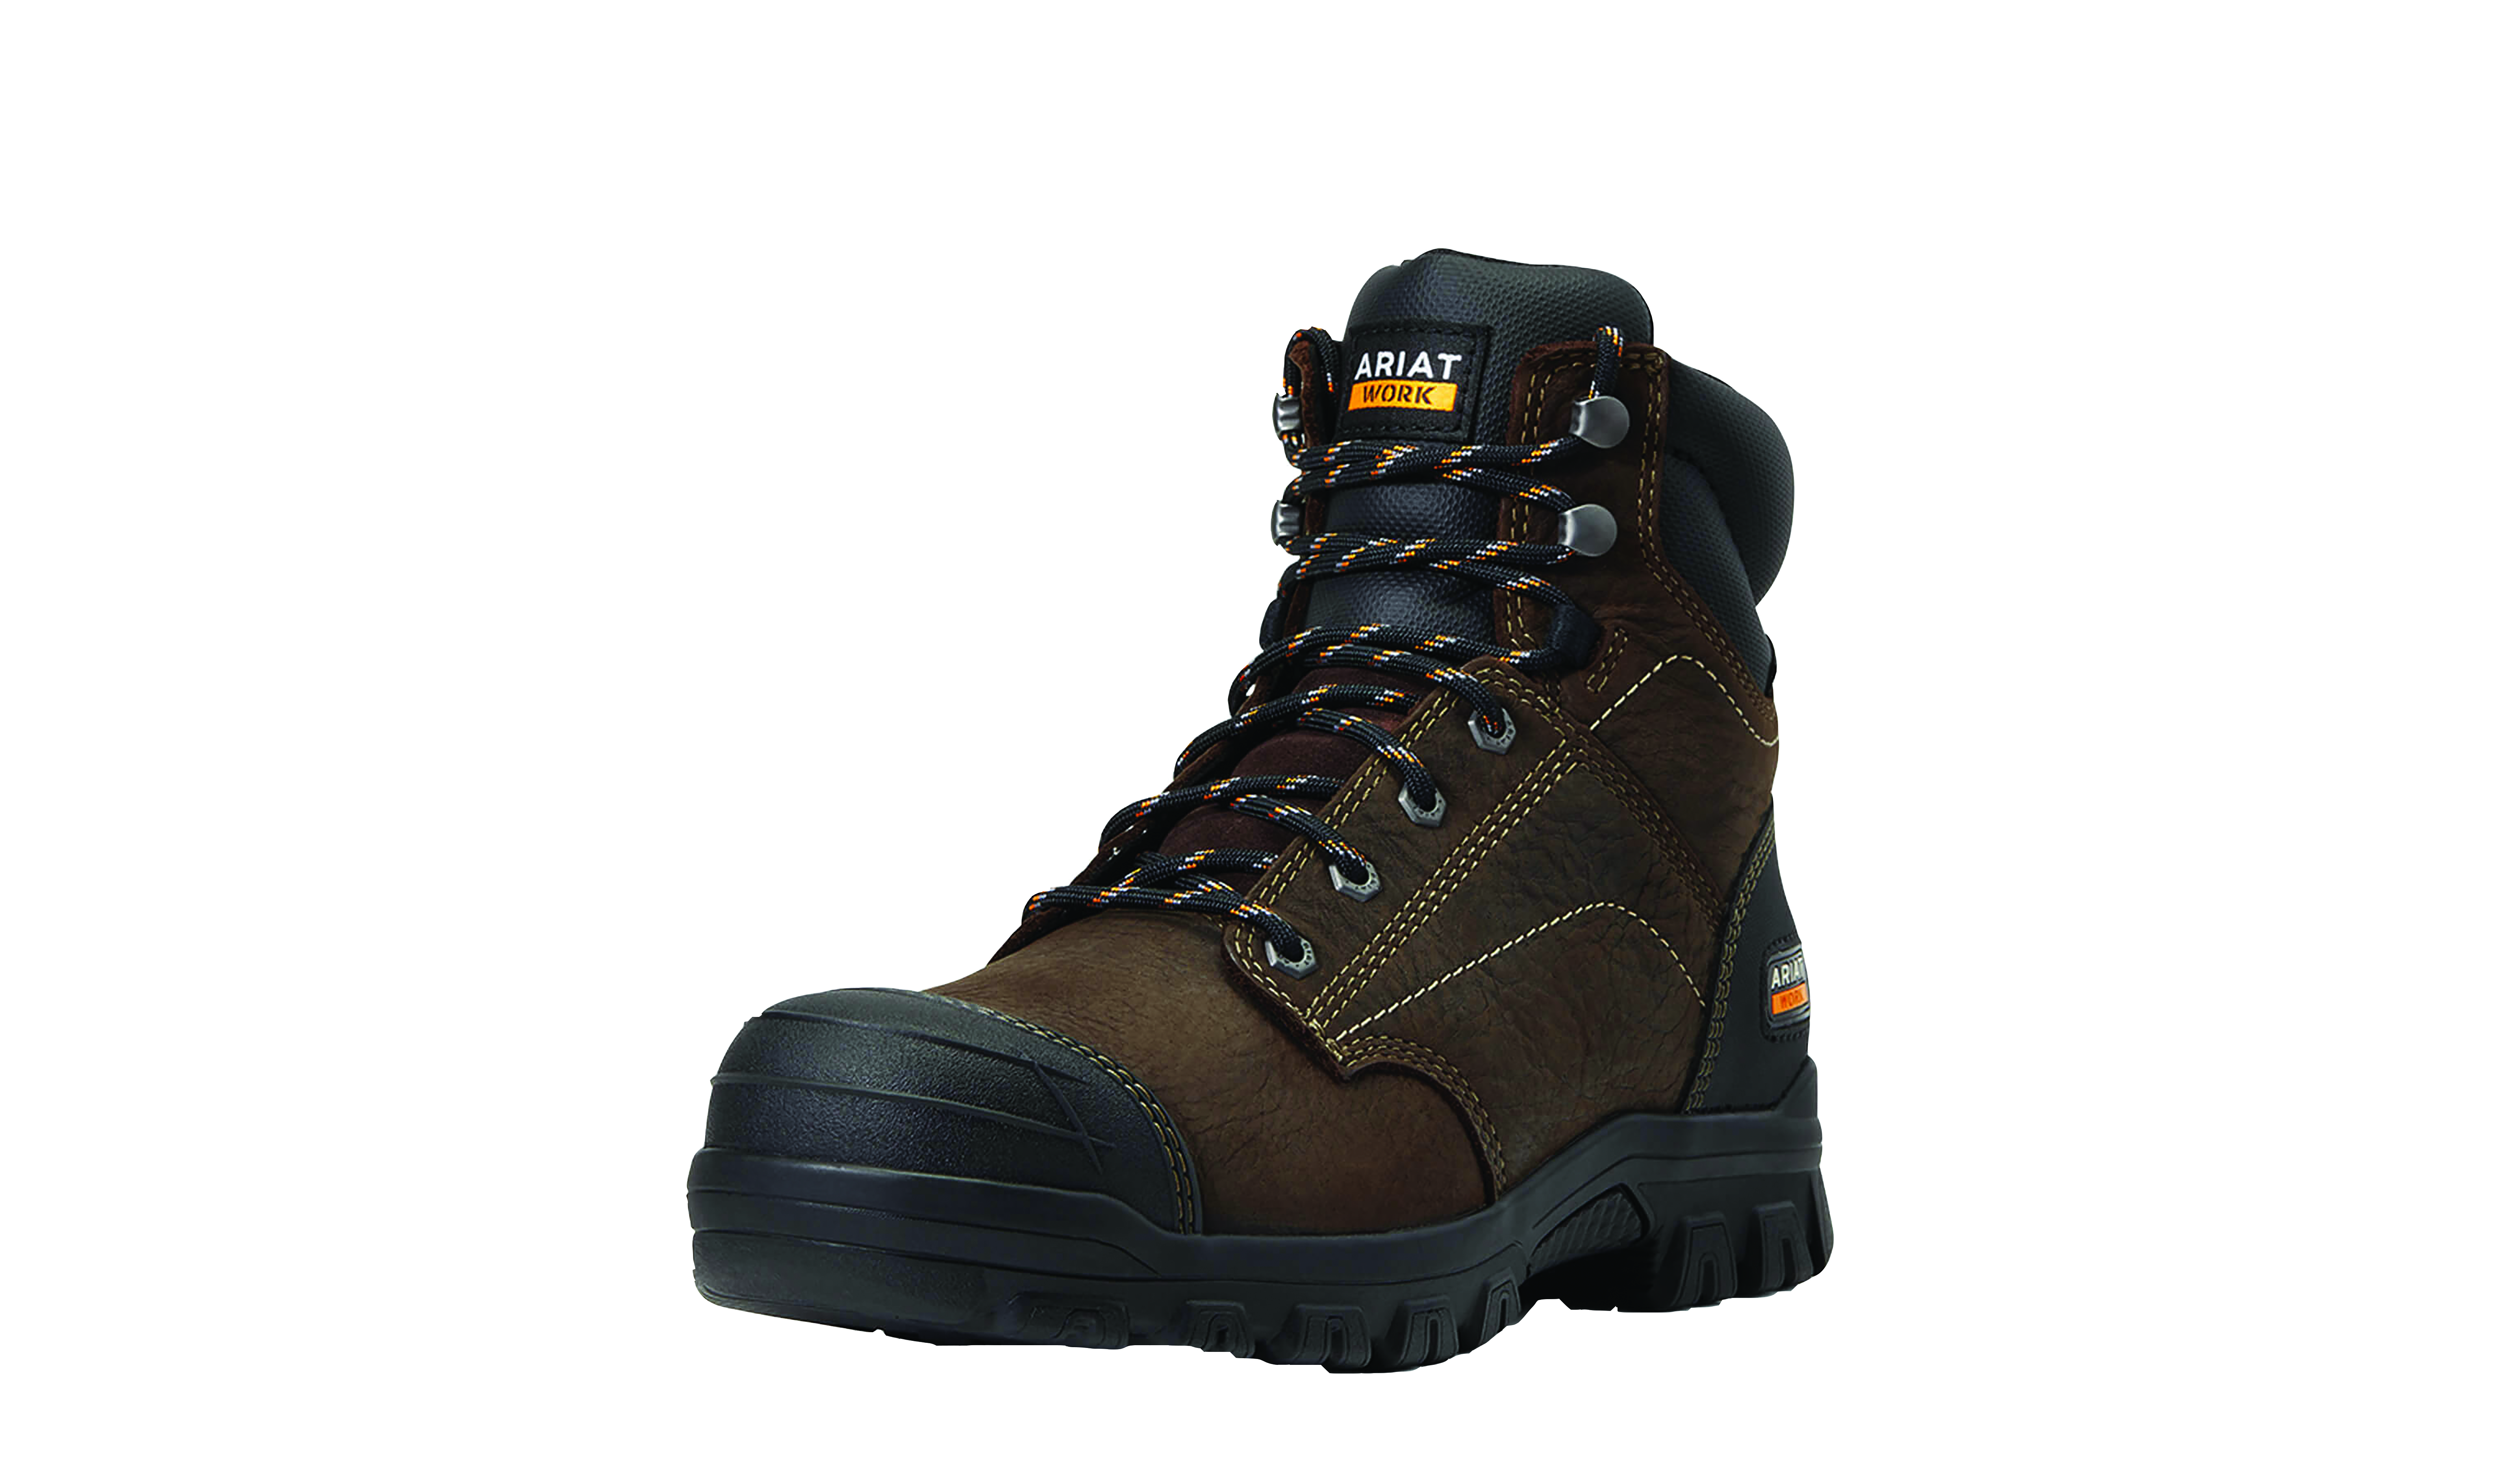 Brown work boot featuring an "Ariat Work" label. Image by Ariat International Inc.